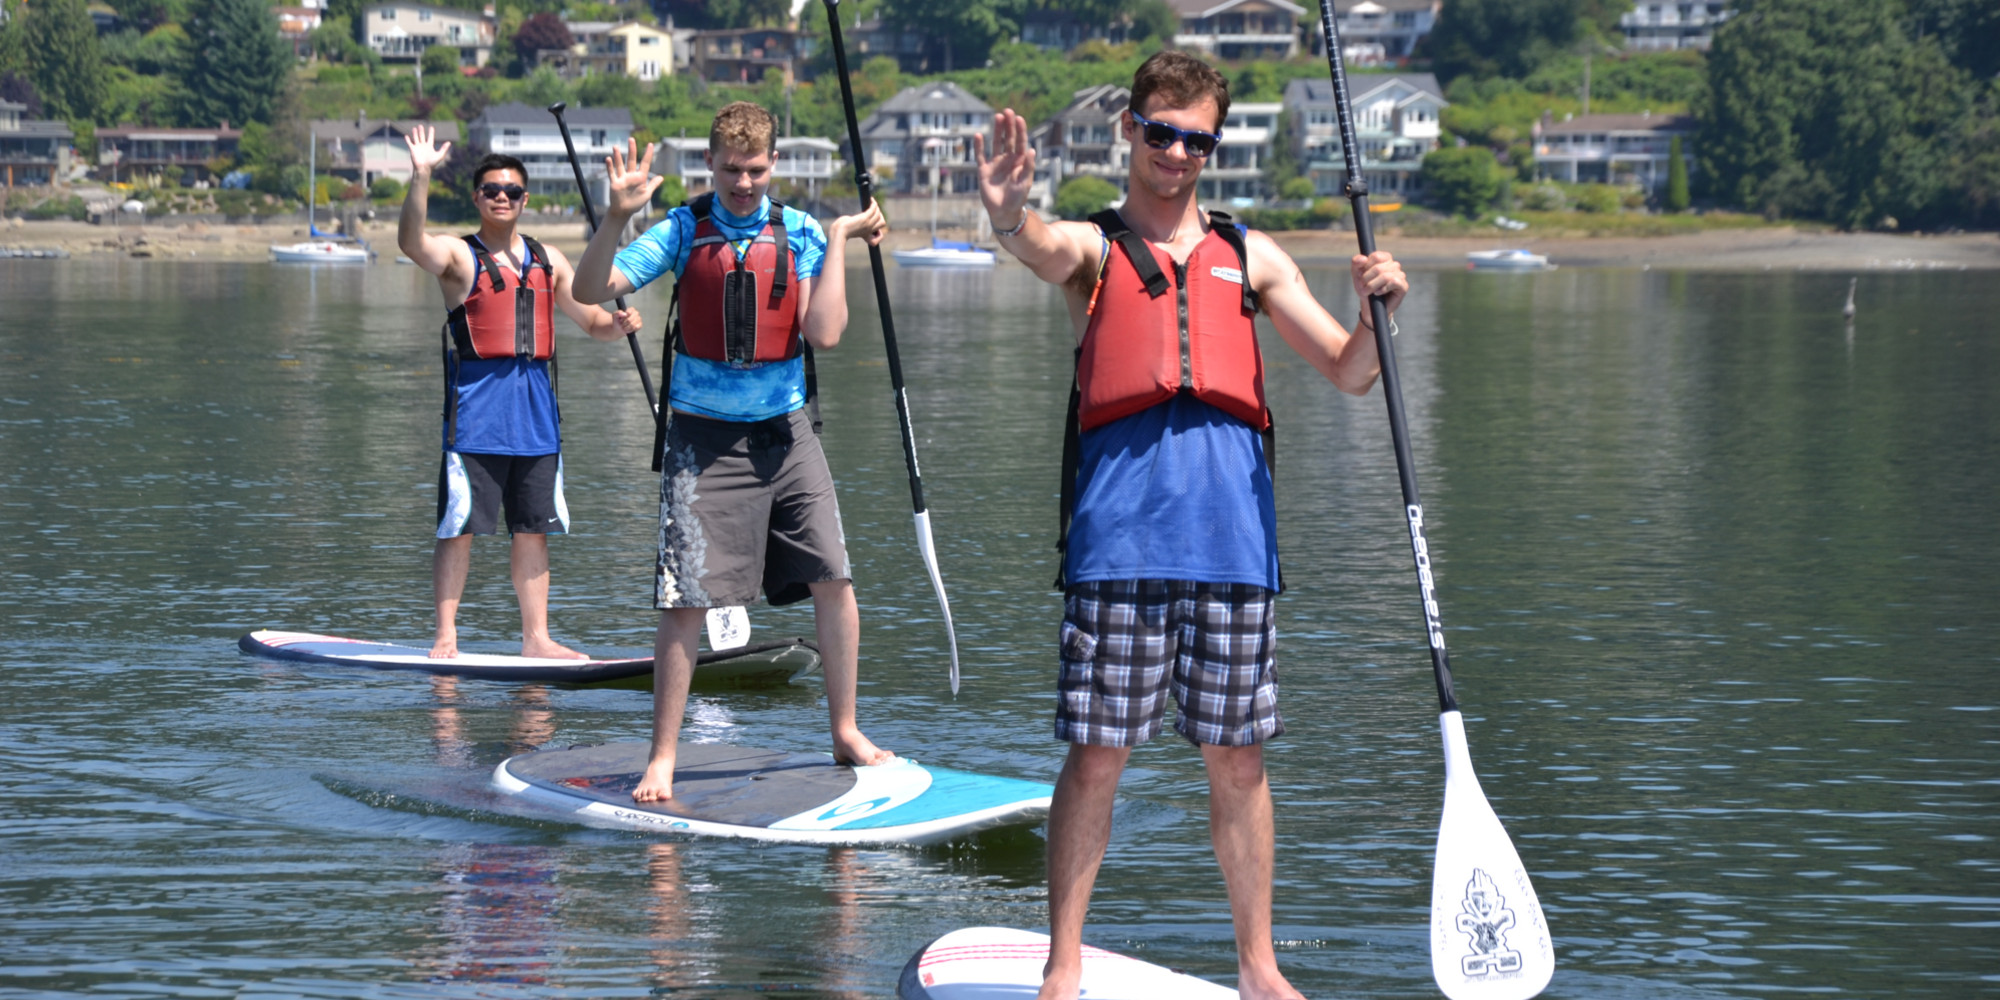 Three young men wave to the camera while standing on paddle boards.